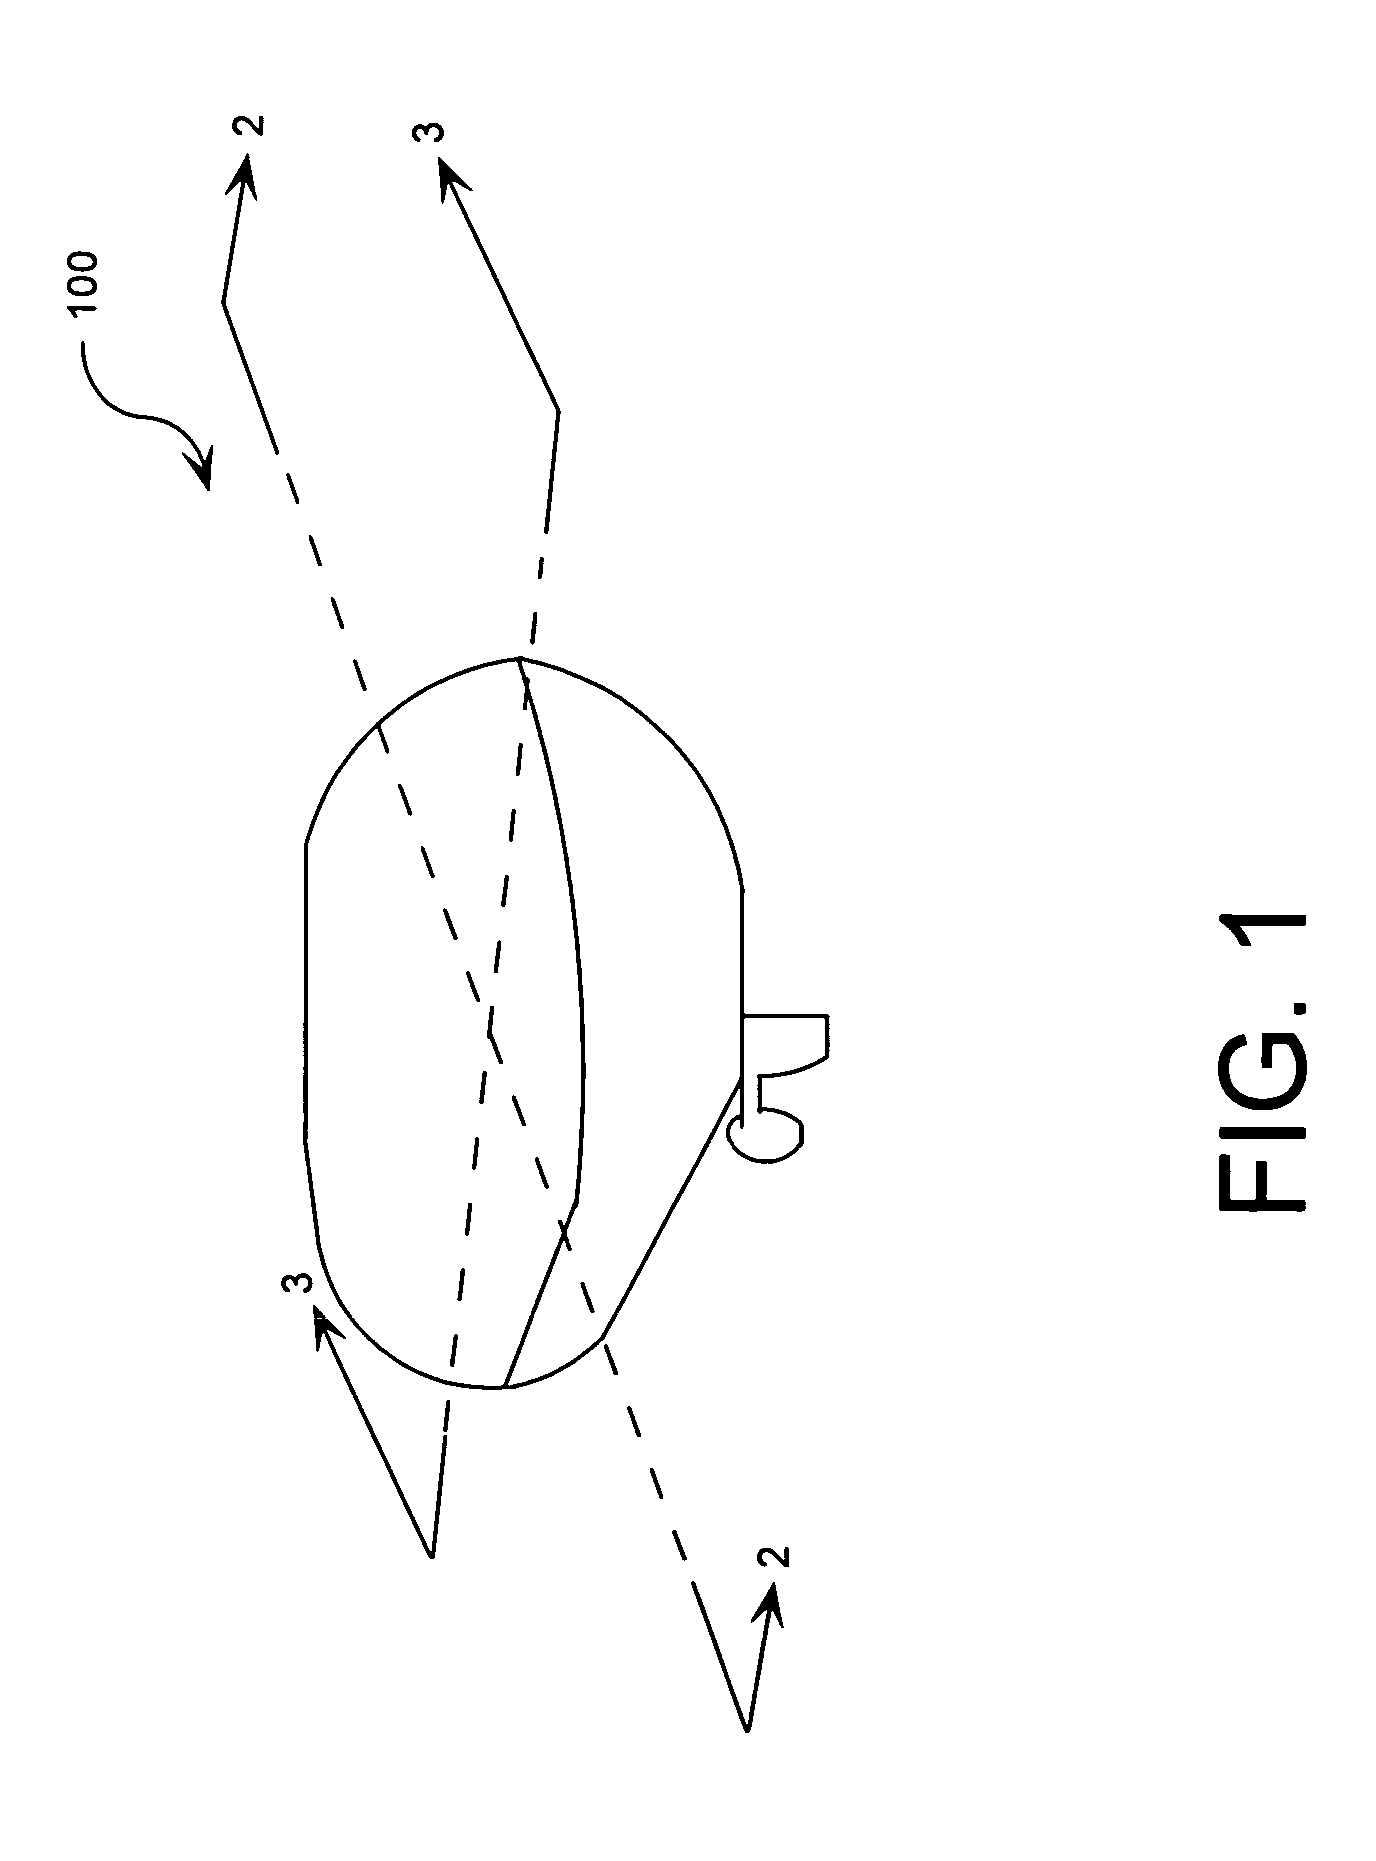 System for providing continuous electric power from solar energy